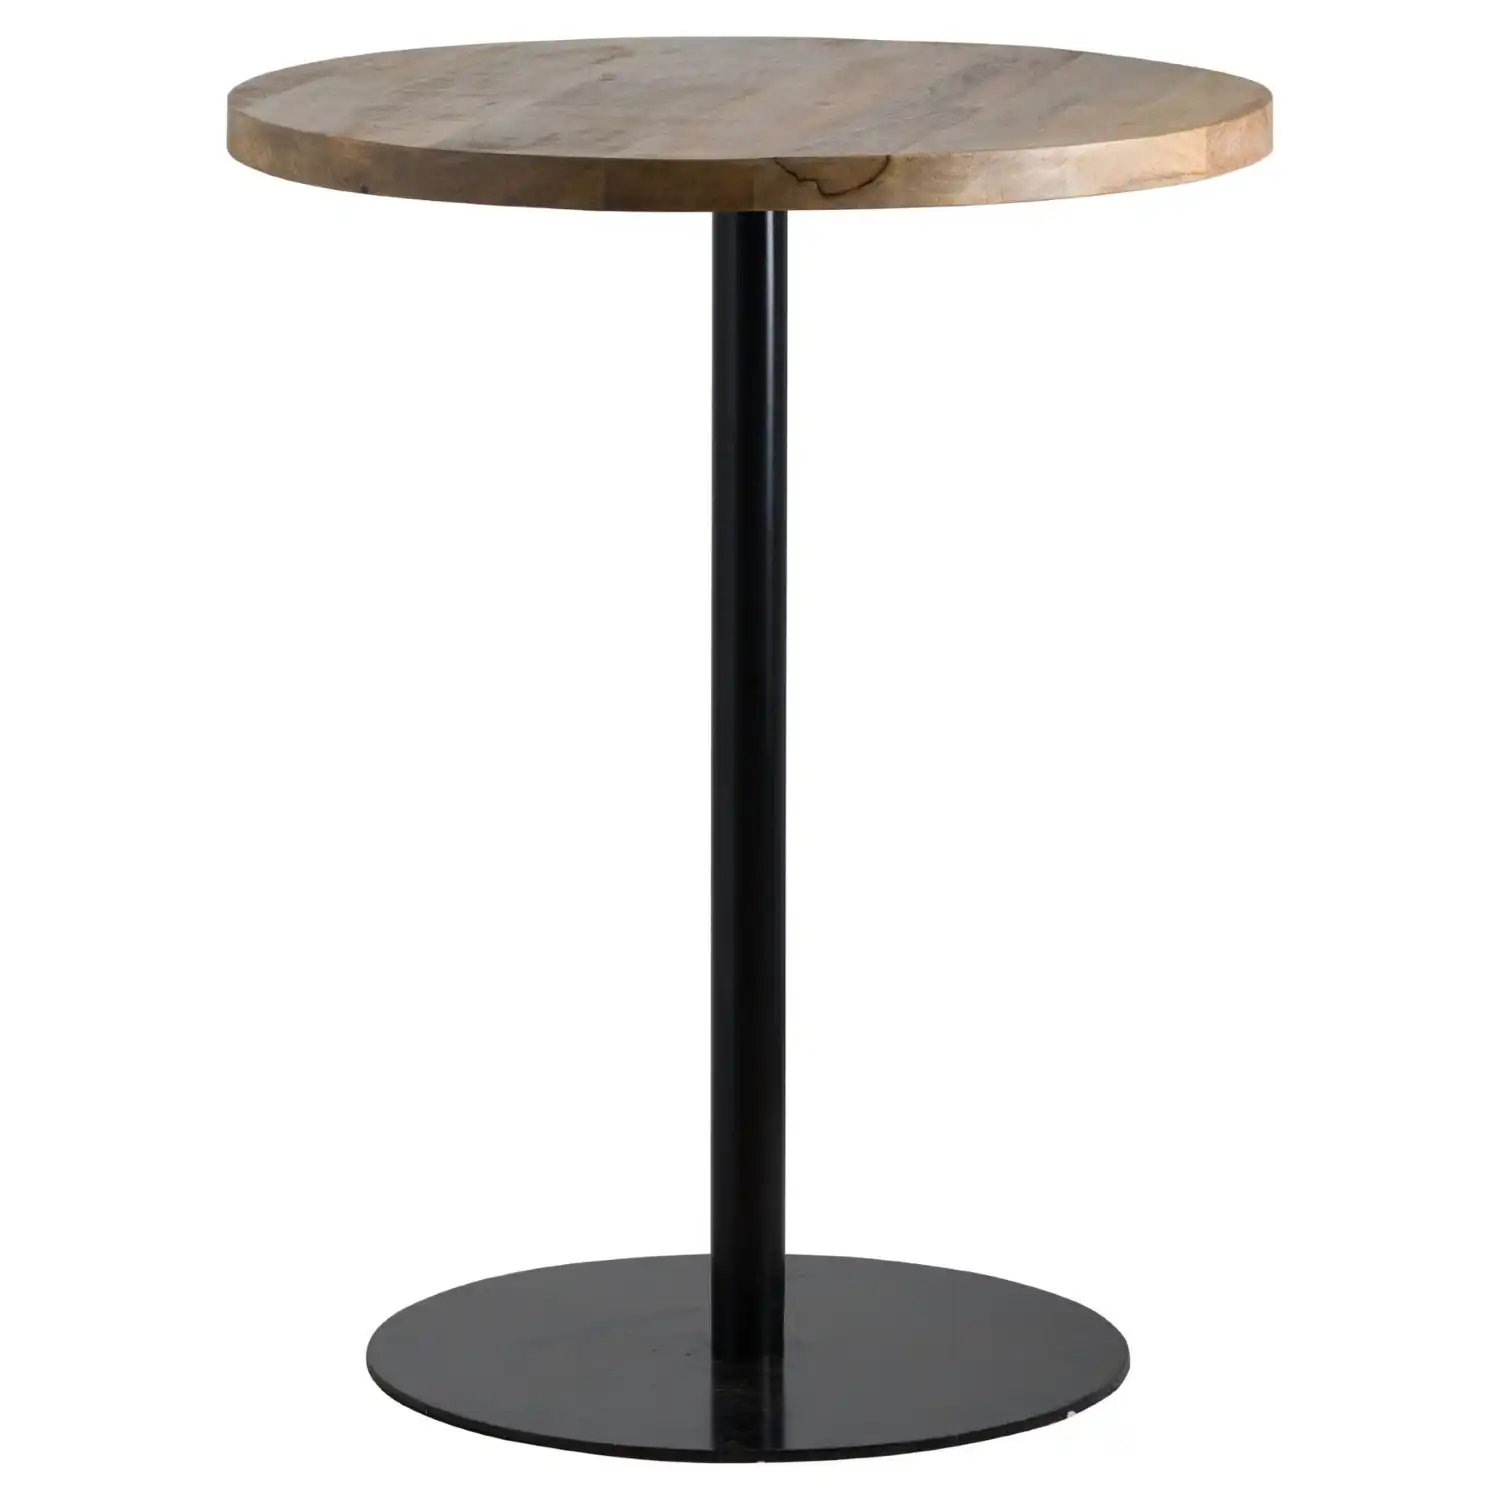 Industrial Style Tall Bar Table With Round Wood Top And Black Finish Metal Base 98x80cm